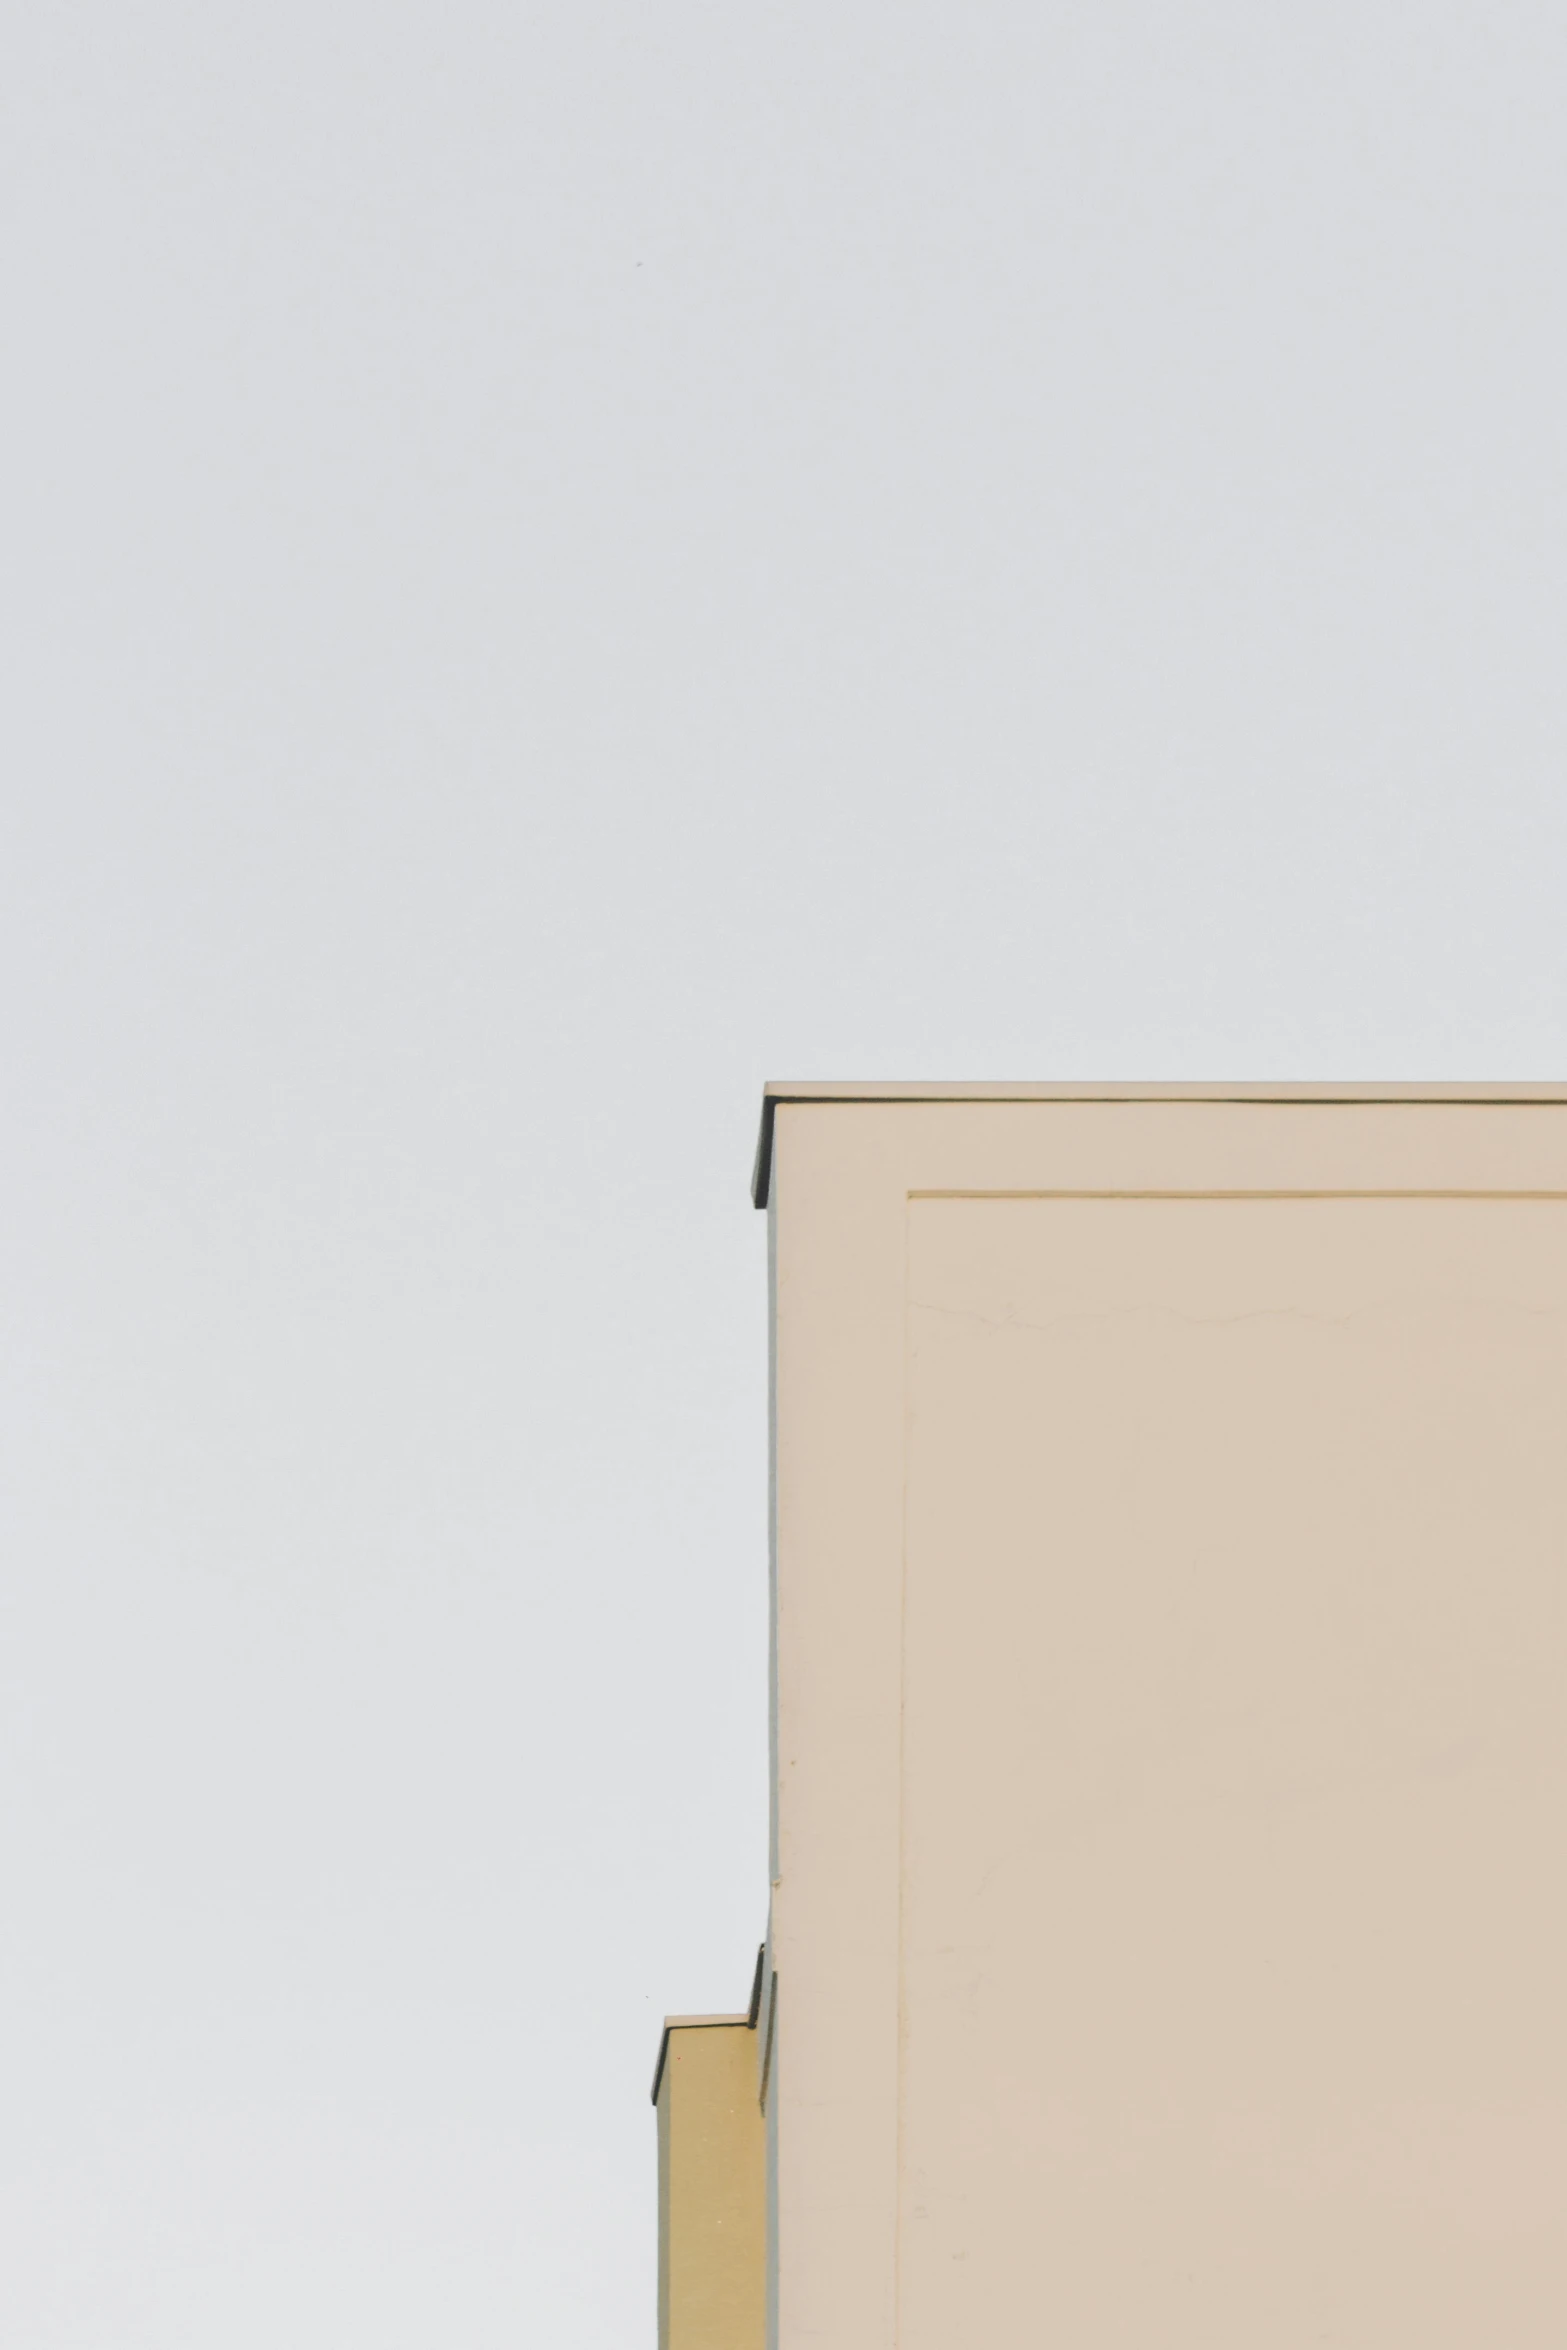 a clock that is on the side of a building, by Zhang Kechun, unsplash, conceptual art, seamless micro detail, big opened book, avatar image, white box